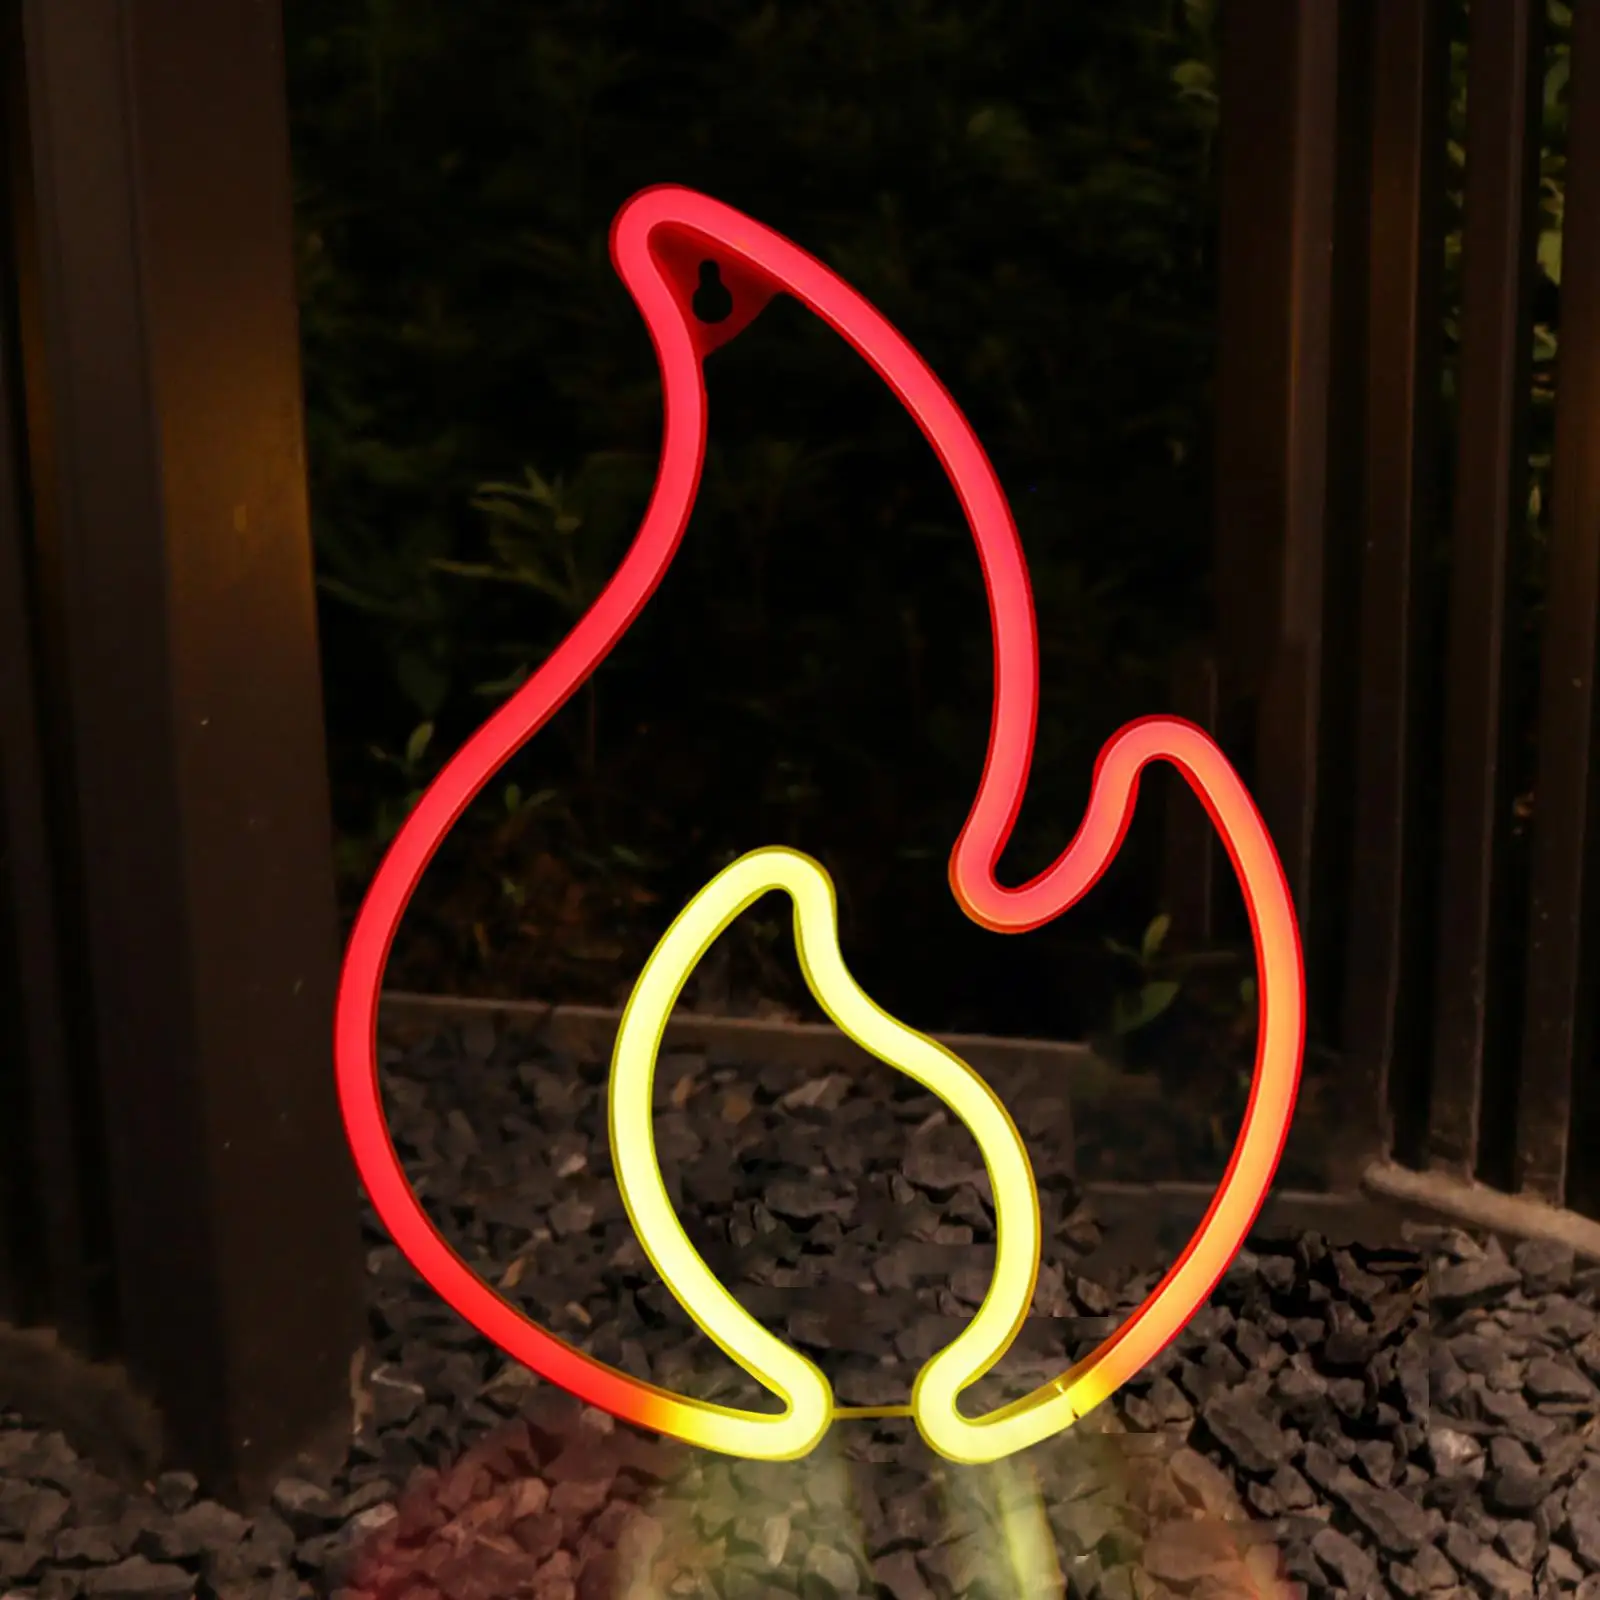 Flame Neon Sign Decoration USB Powered Hanging Flame Shaped Night Lights for Bar Bedroom Halloween Birthday Party